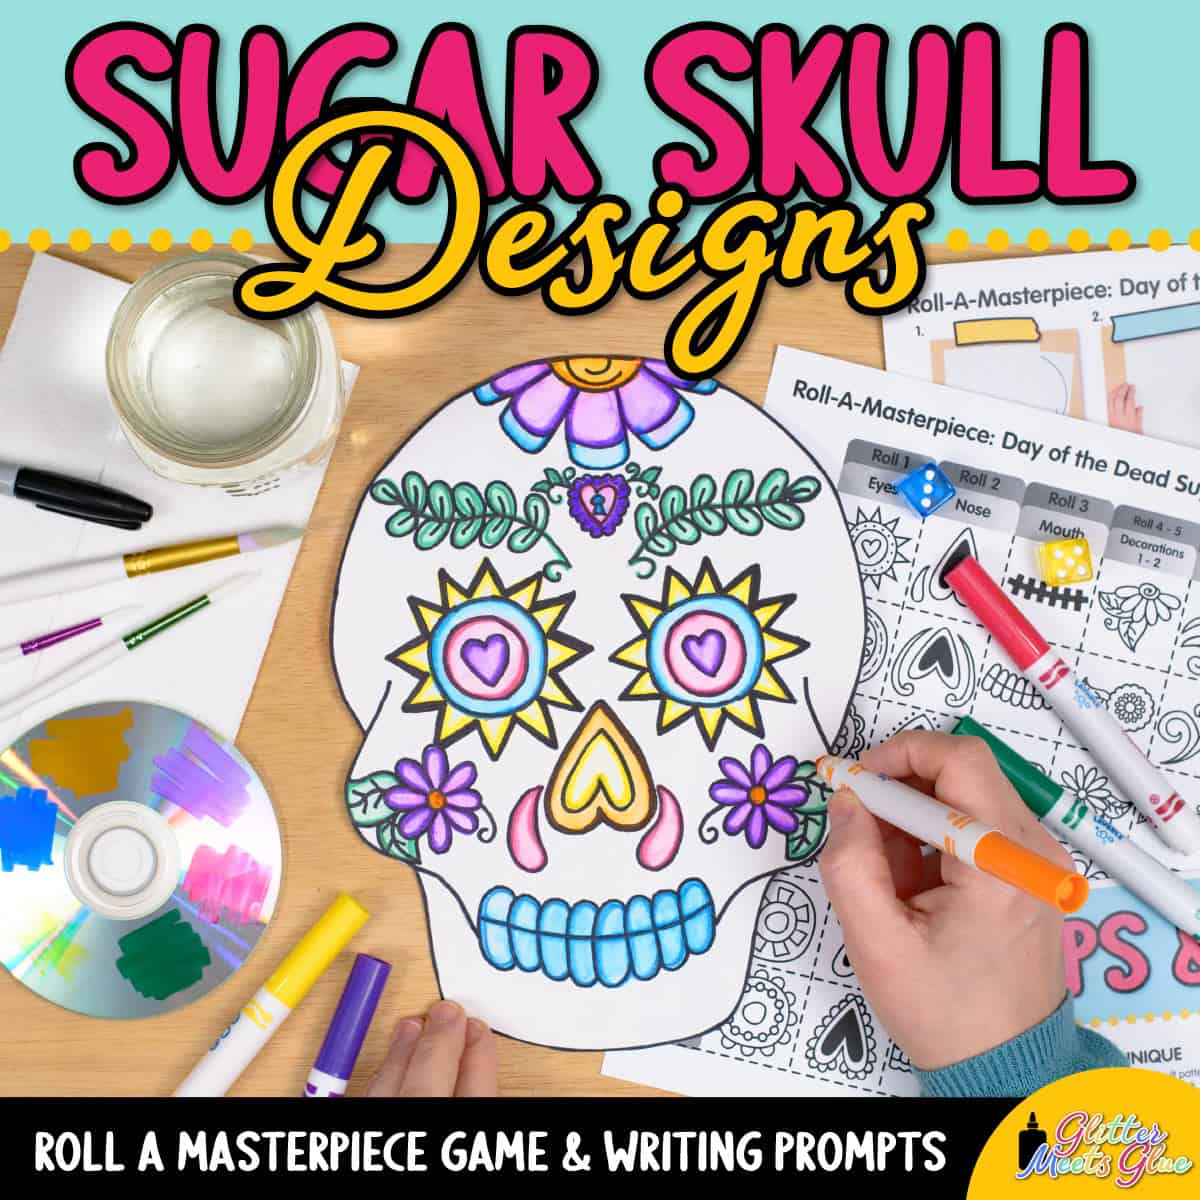 Day of the dead art game â roll a sugar skull project sub plan